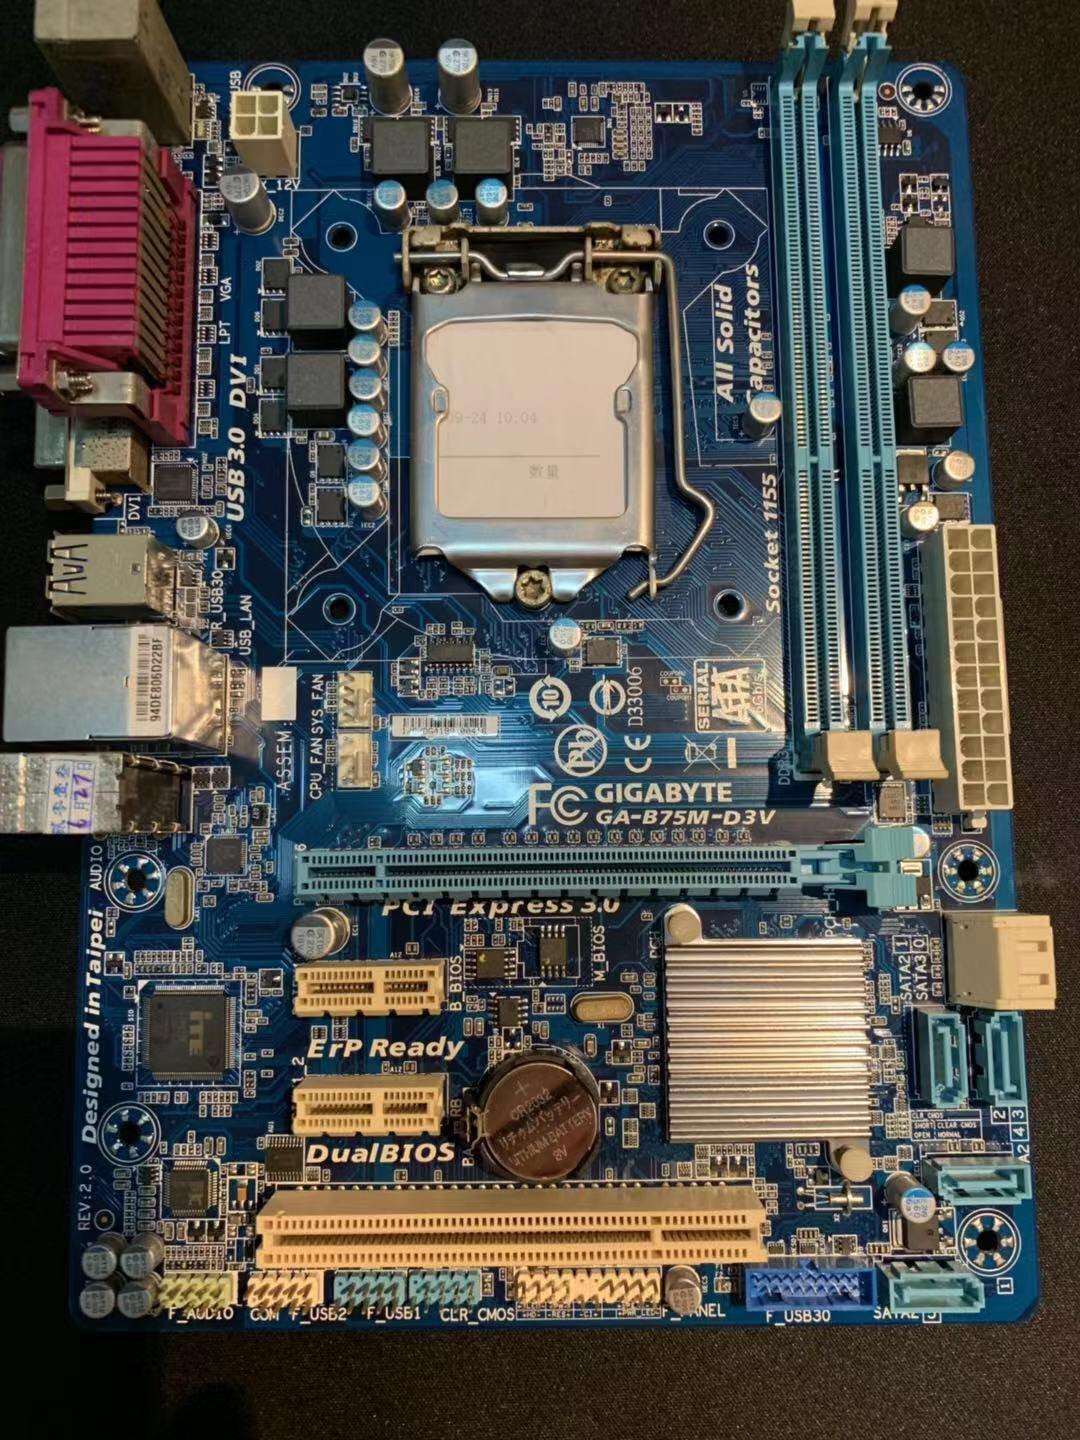 Gigabyte 5m D3v Socket 1155 Motherboard Electronics Computer Parts Accessories On Carousell